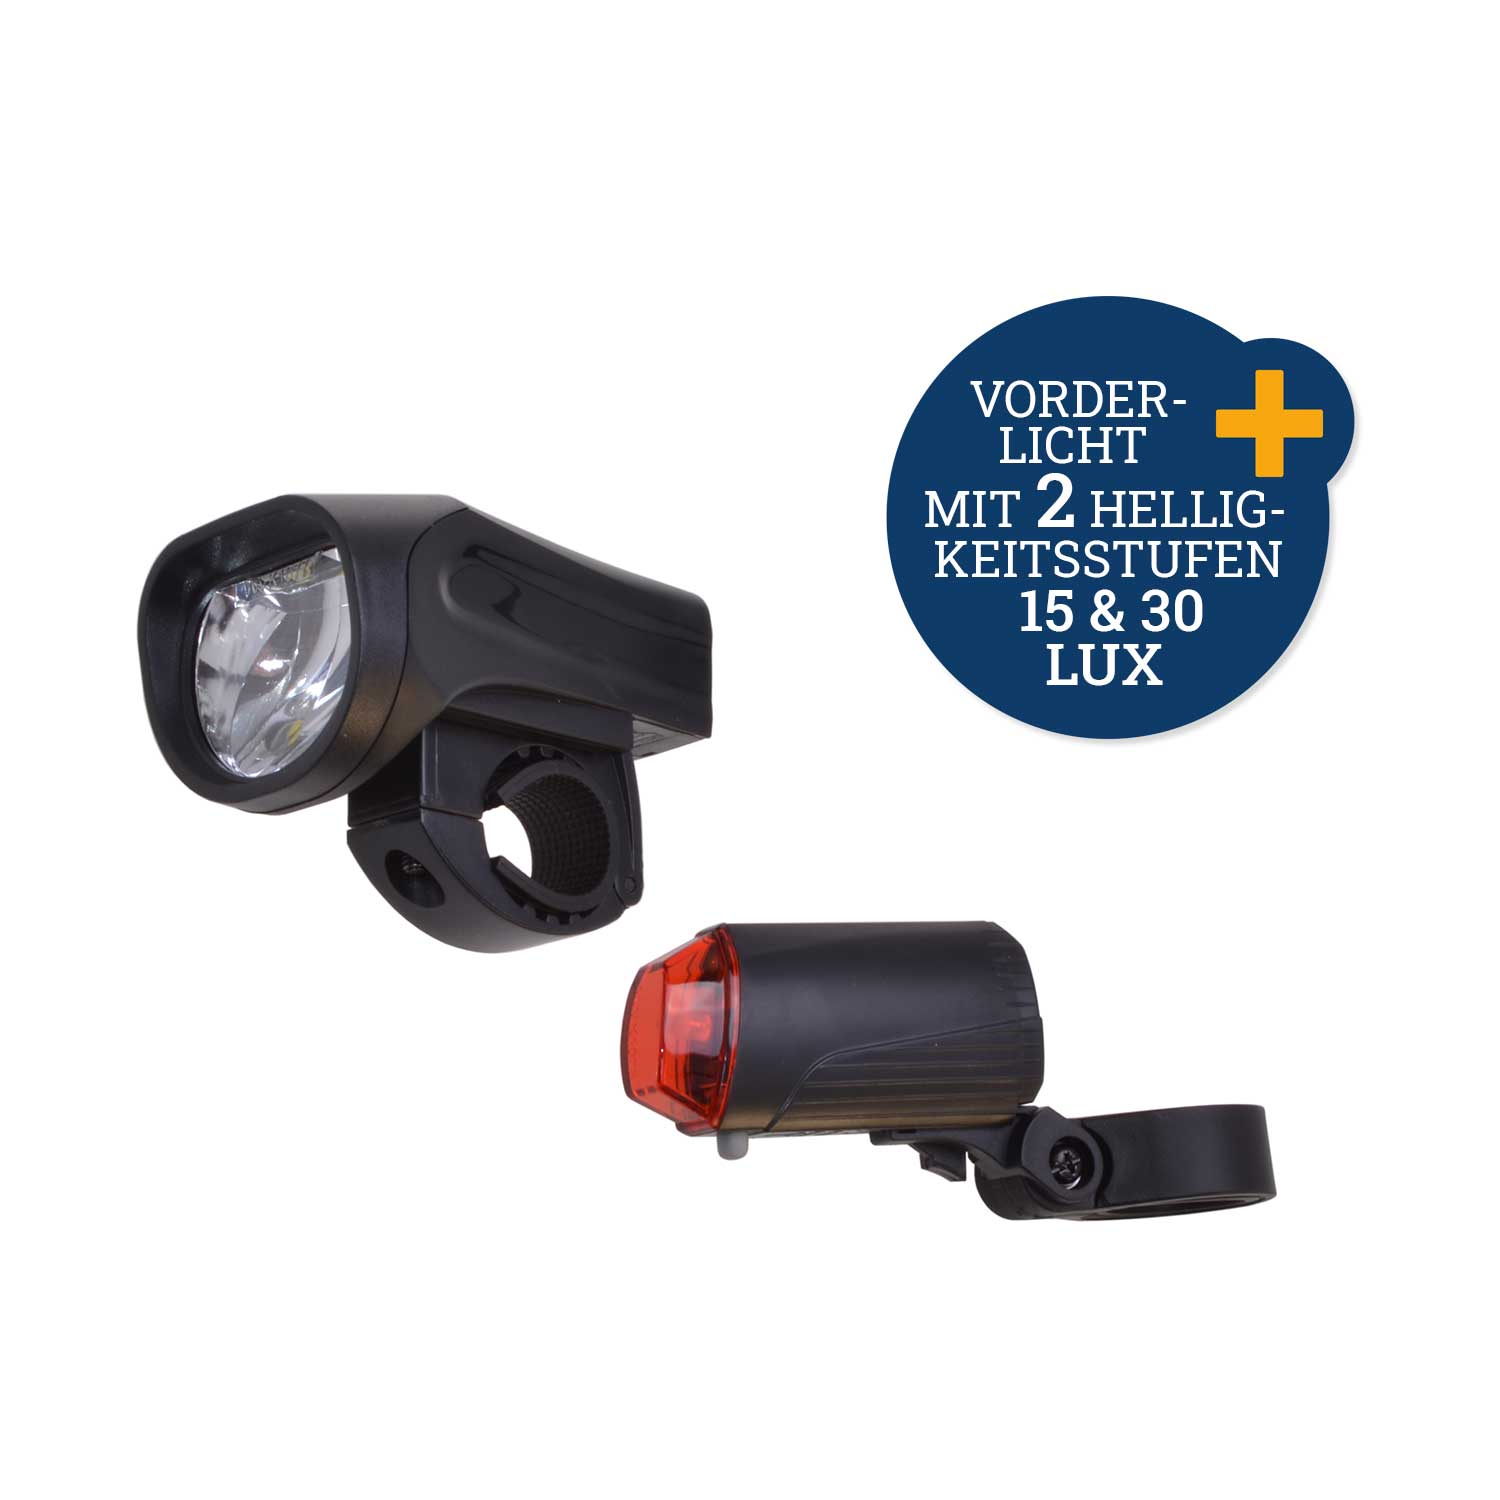 LED-Beleuchtungs-Set 30 LUX